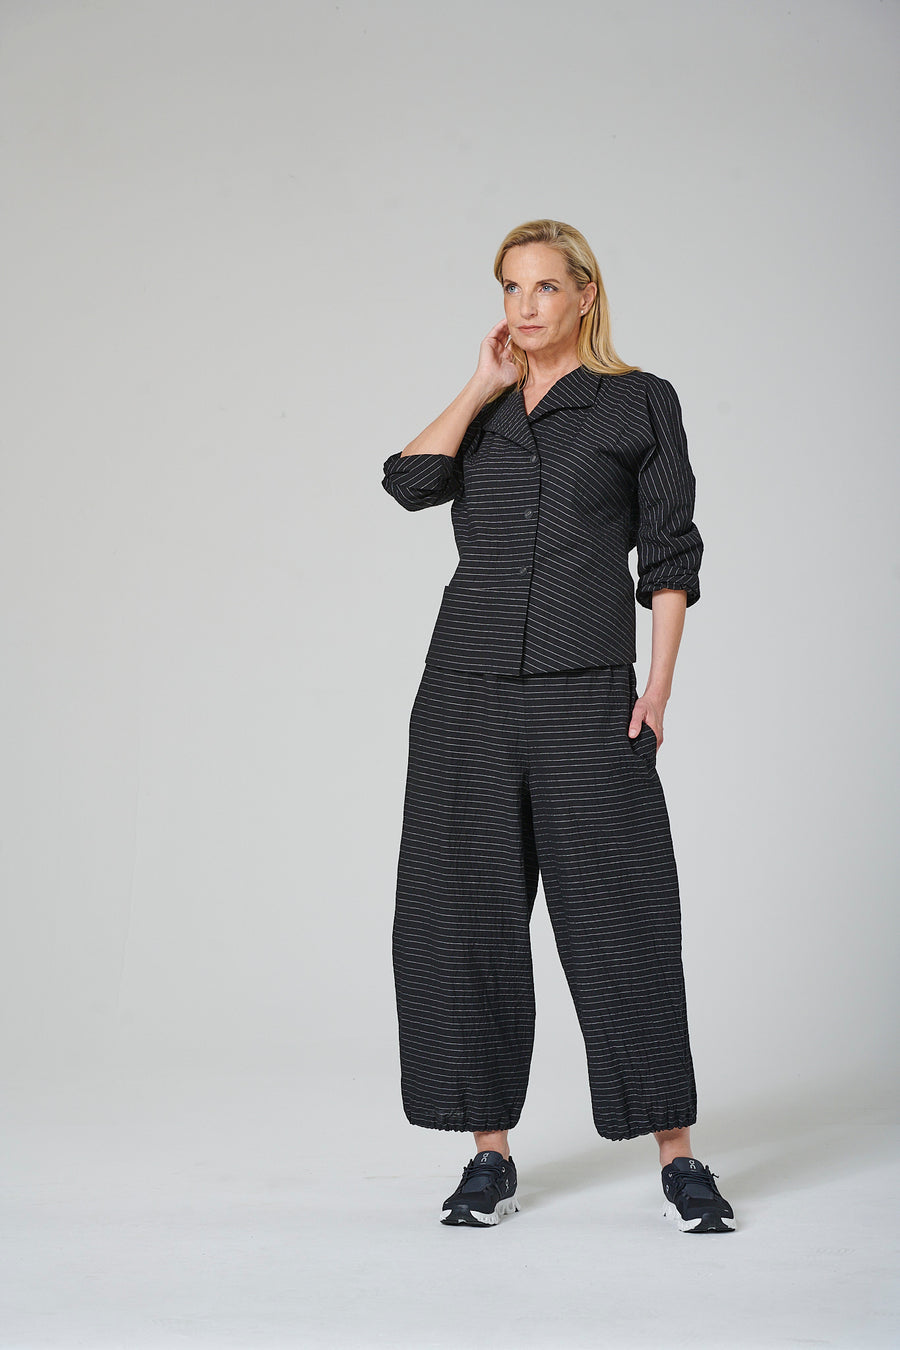 Trousers made of cotton with 1% nylon and 1% elastane (325h1) striped or plain